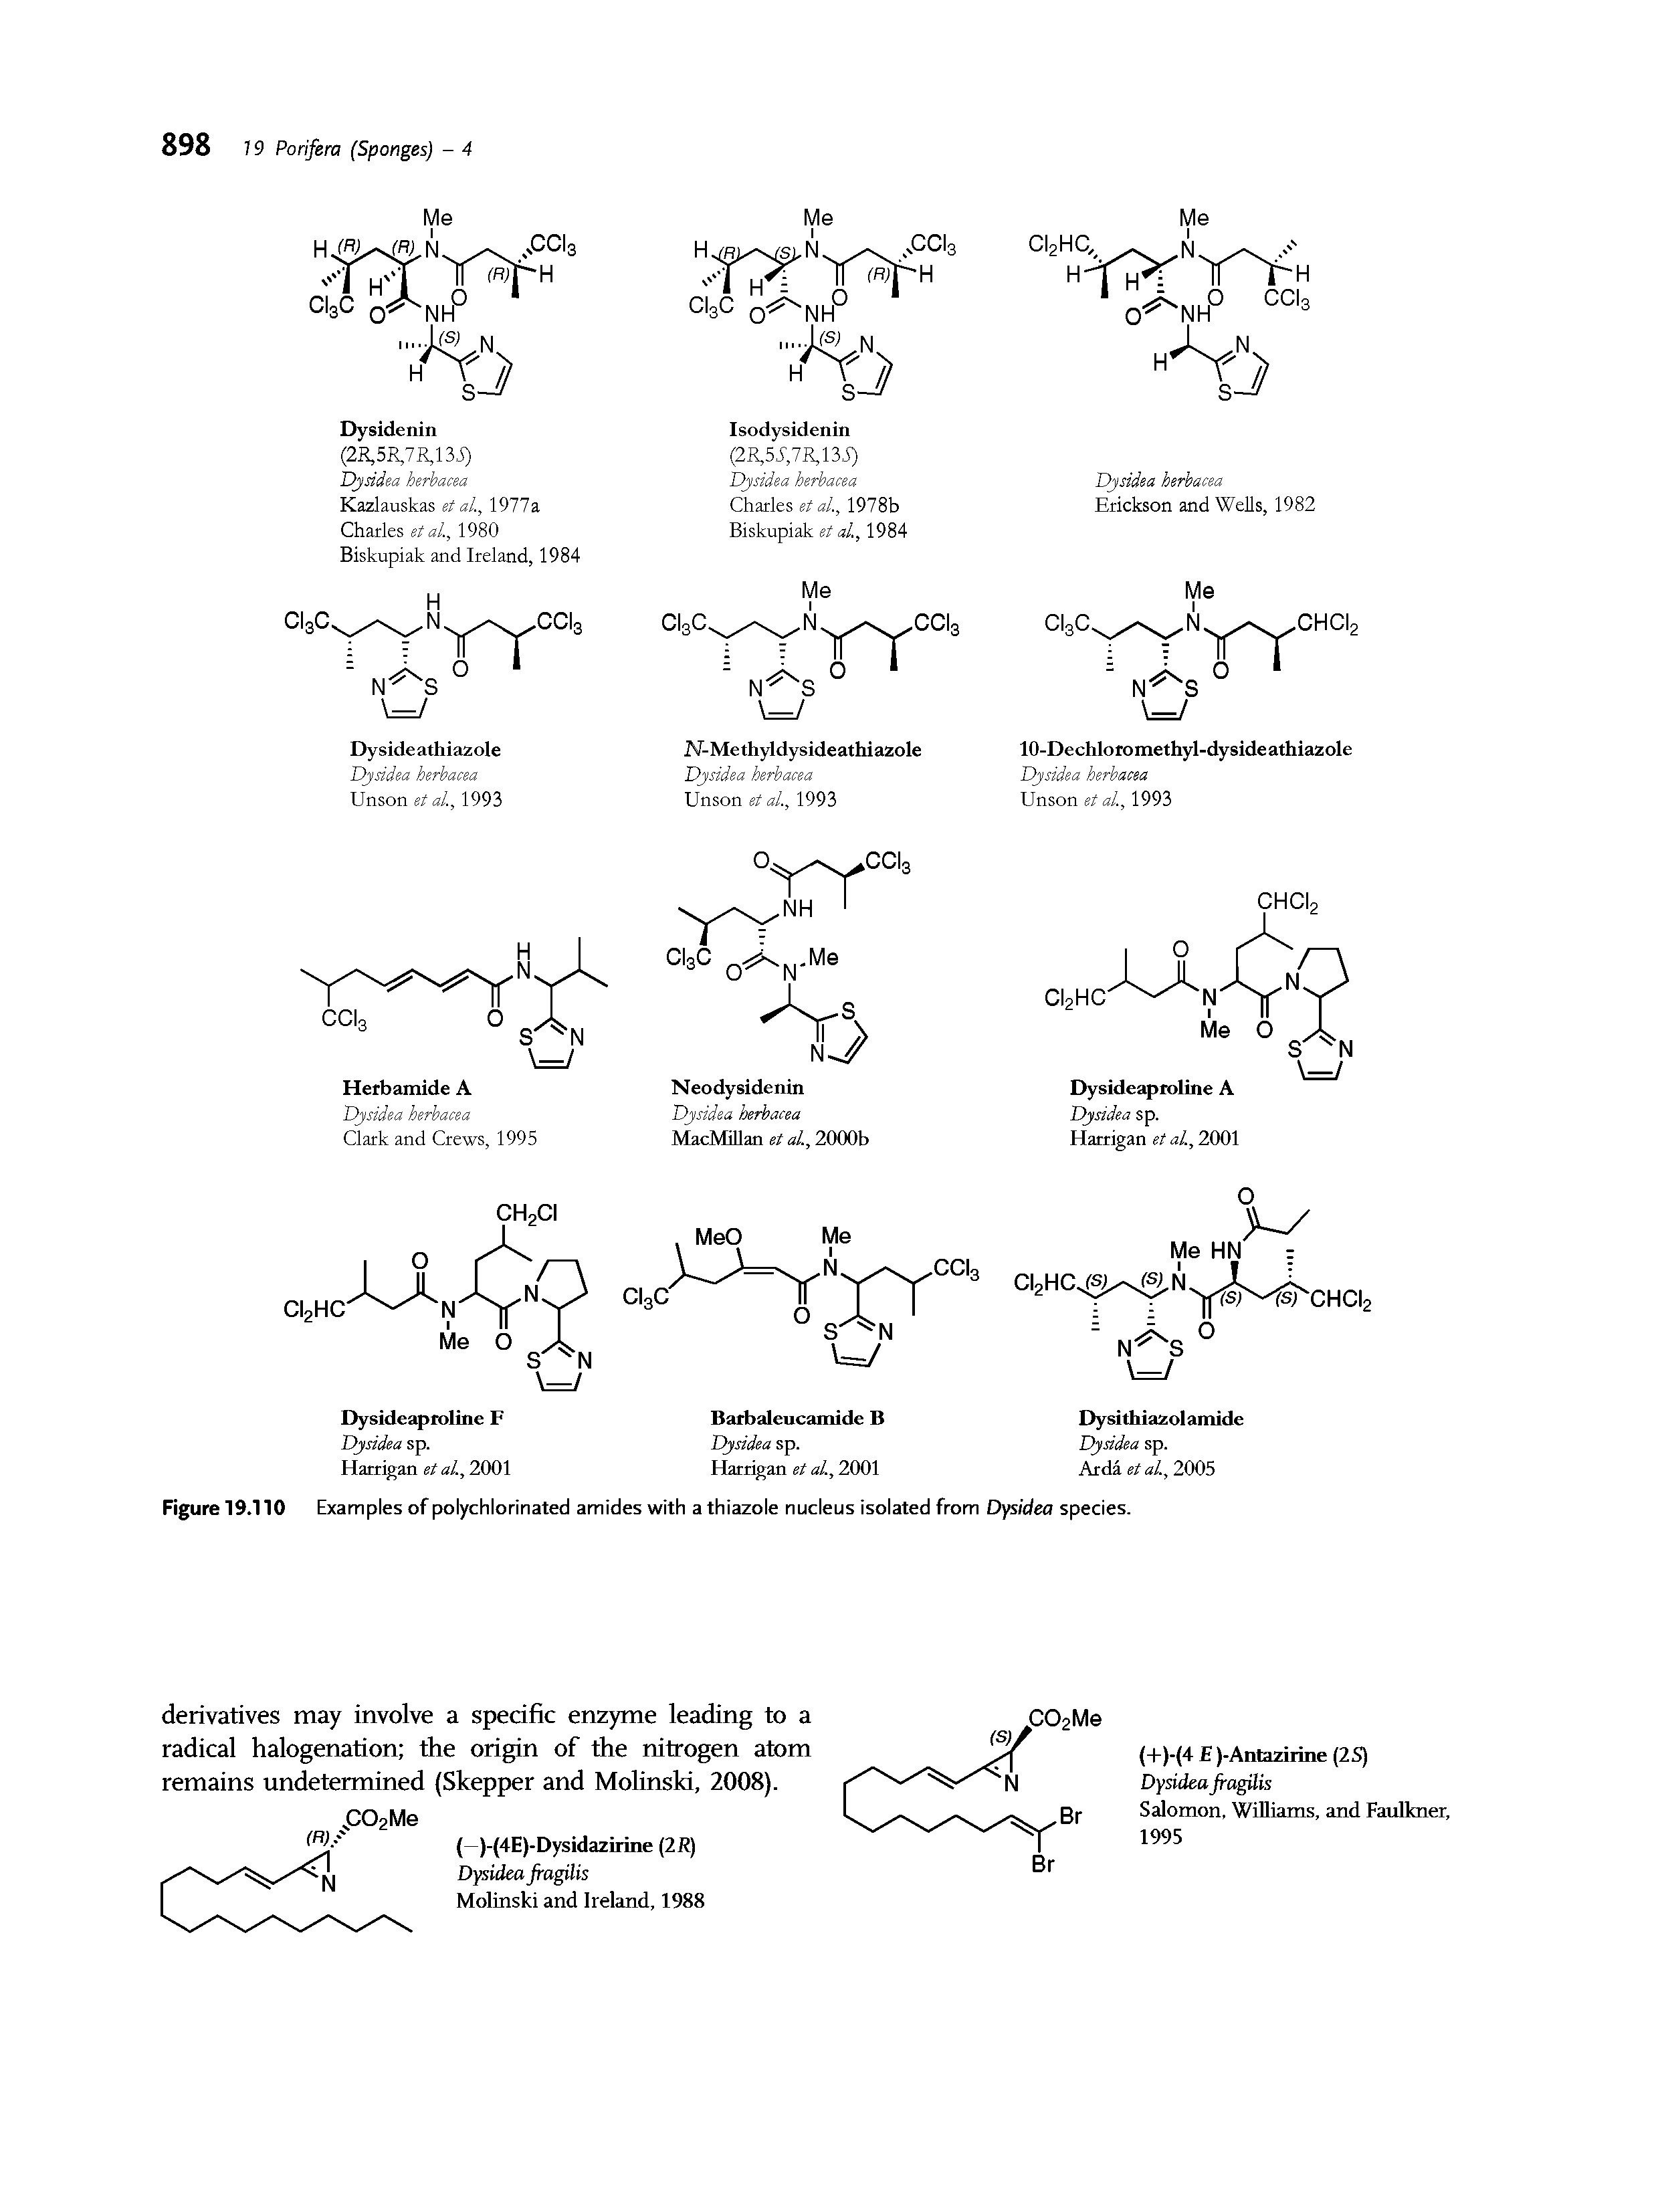 Figure 19.110 Examples of polychlorinated amides with a thiazole nucleus isolated from Dysidea species.